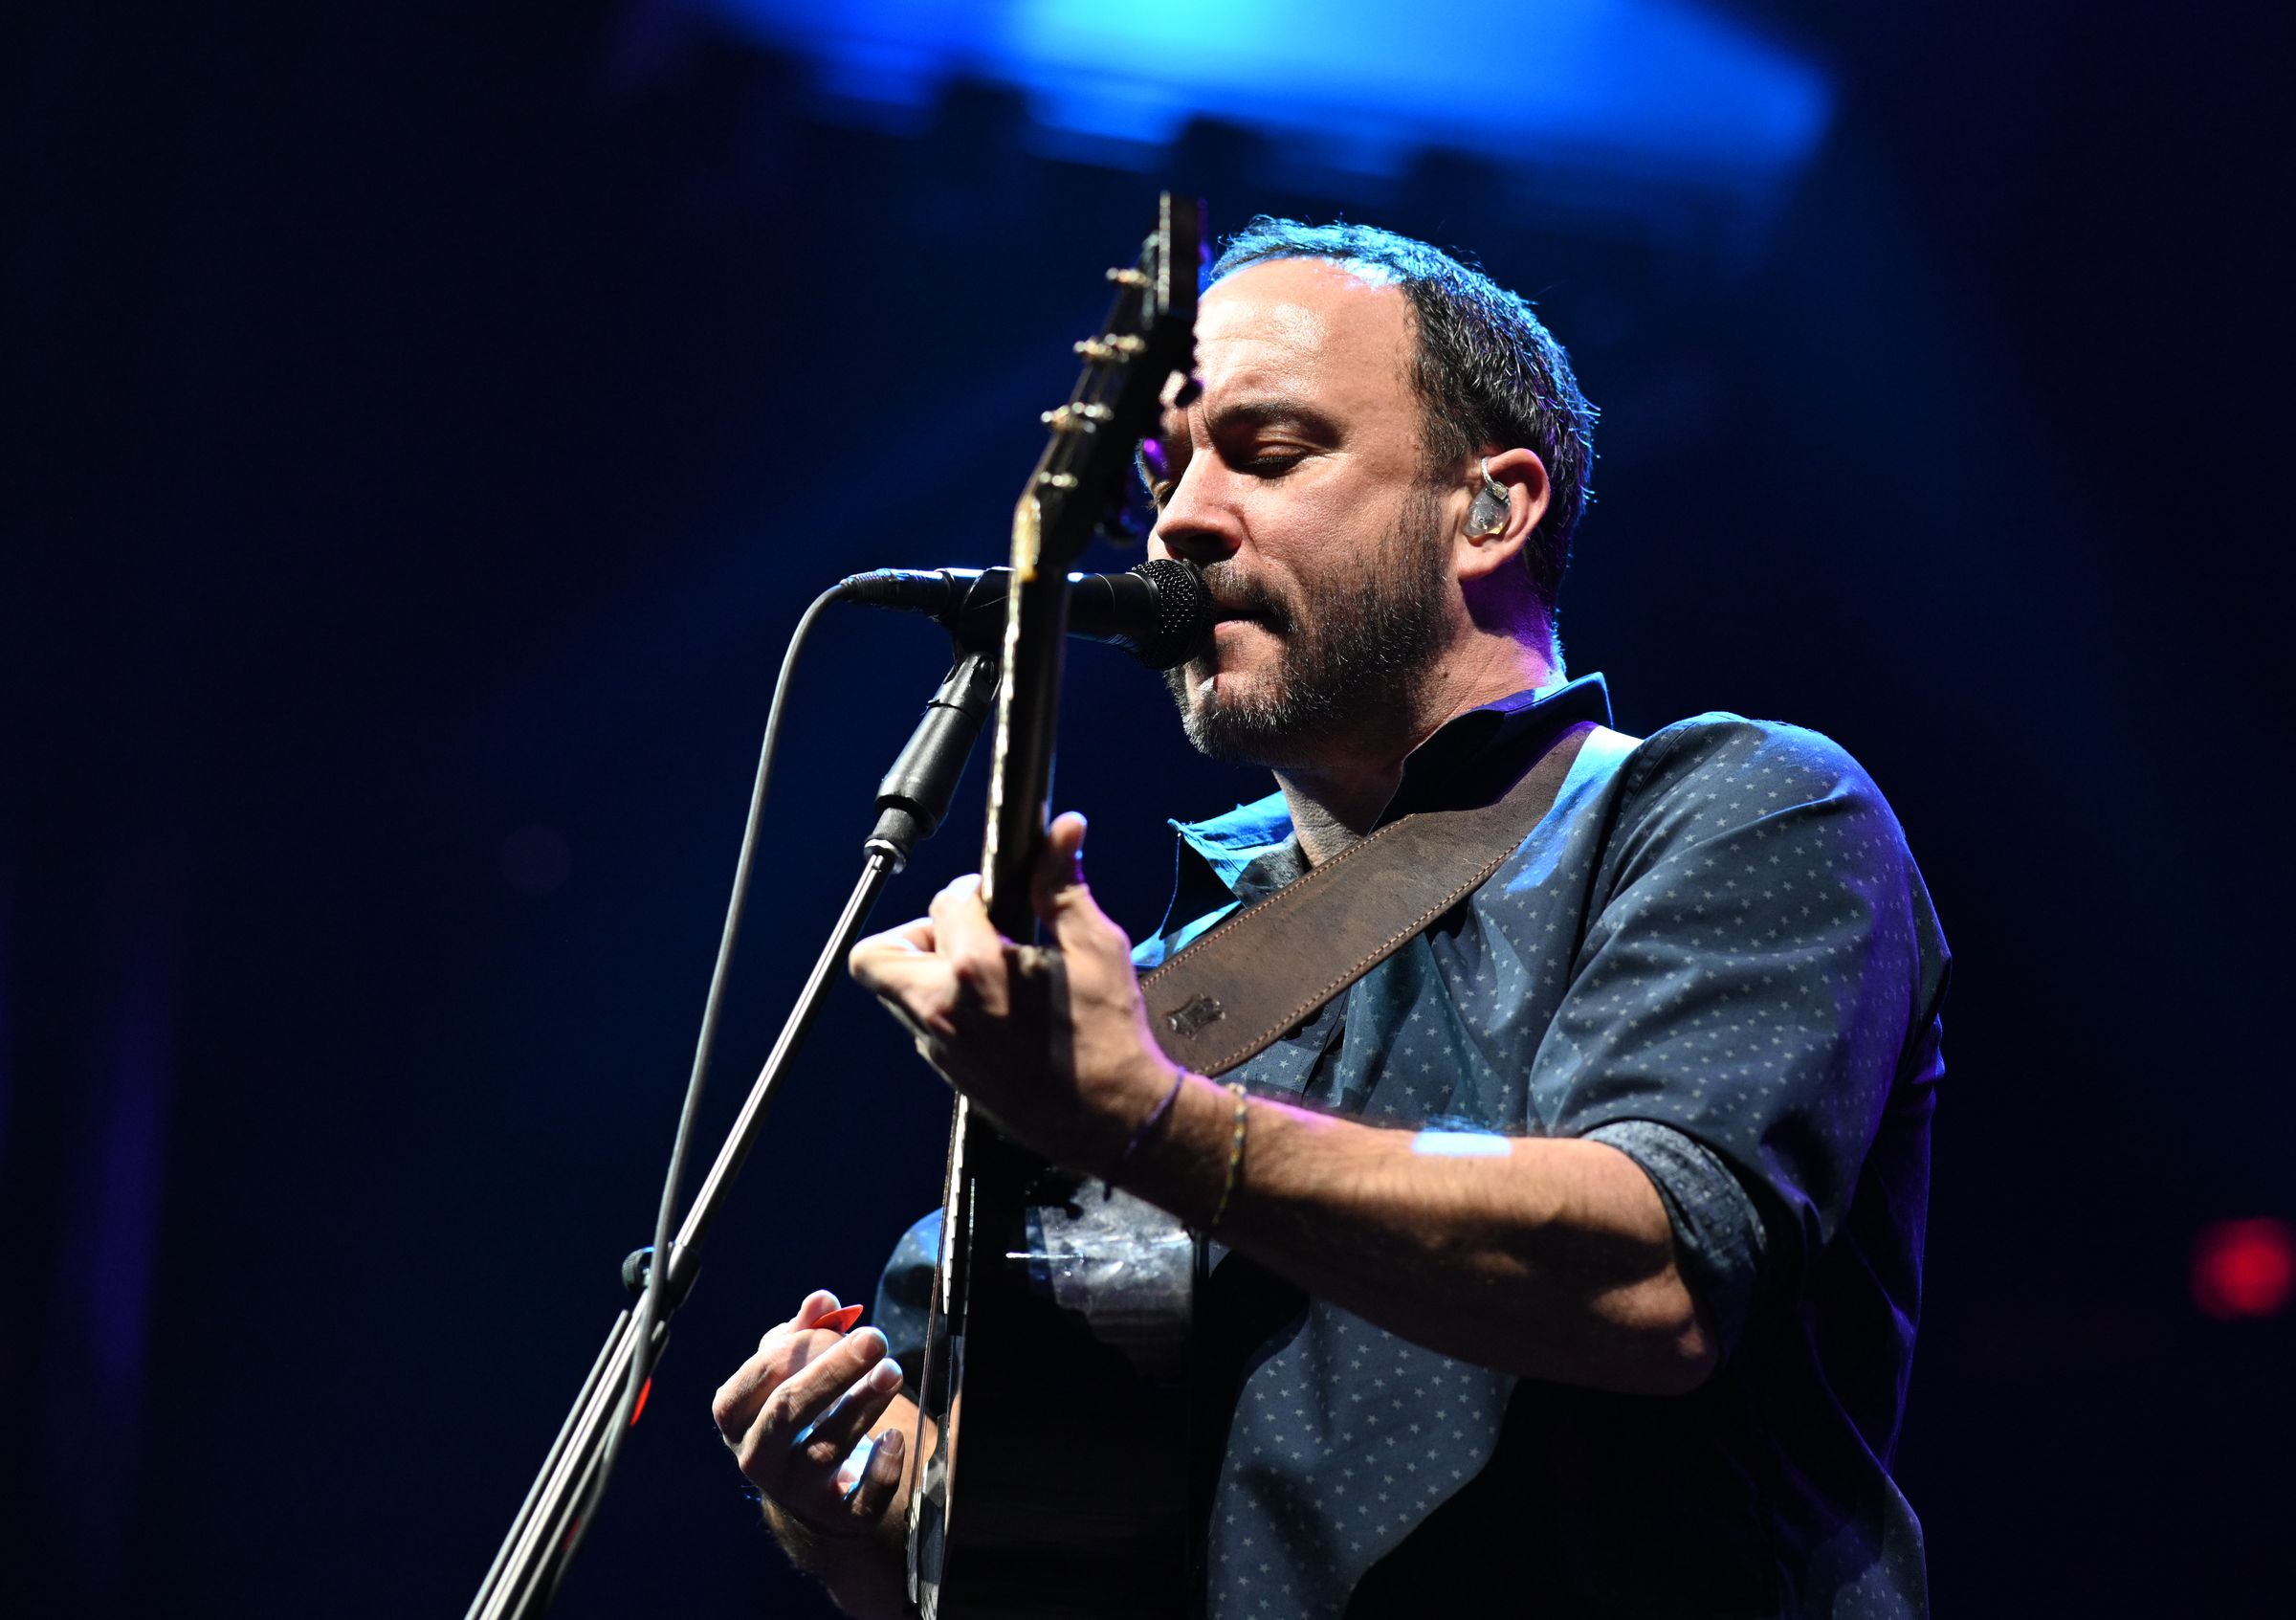 Dave Matthews Band at Times Union Center in Albany, NY on December 5th, 2018. Cropped out-of-camera JPEG. Shot on the Nikon Z7 with 105mm f/1.4 F-mount lens and FTZ adapter. 1/1000sec at f/2.8. ISO 1800. Click or tap here for full-res image.